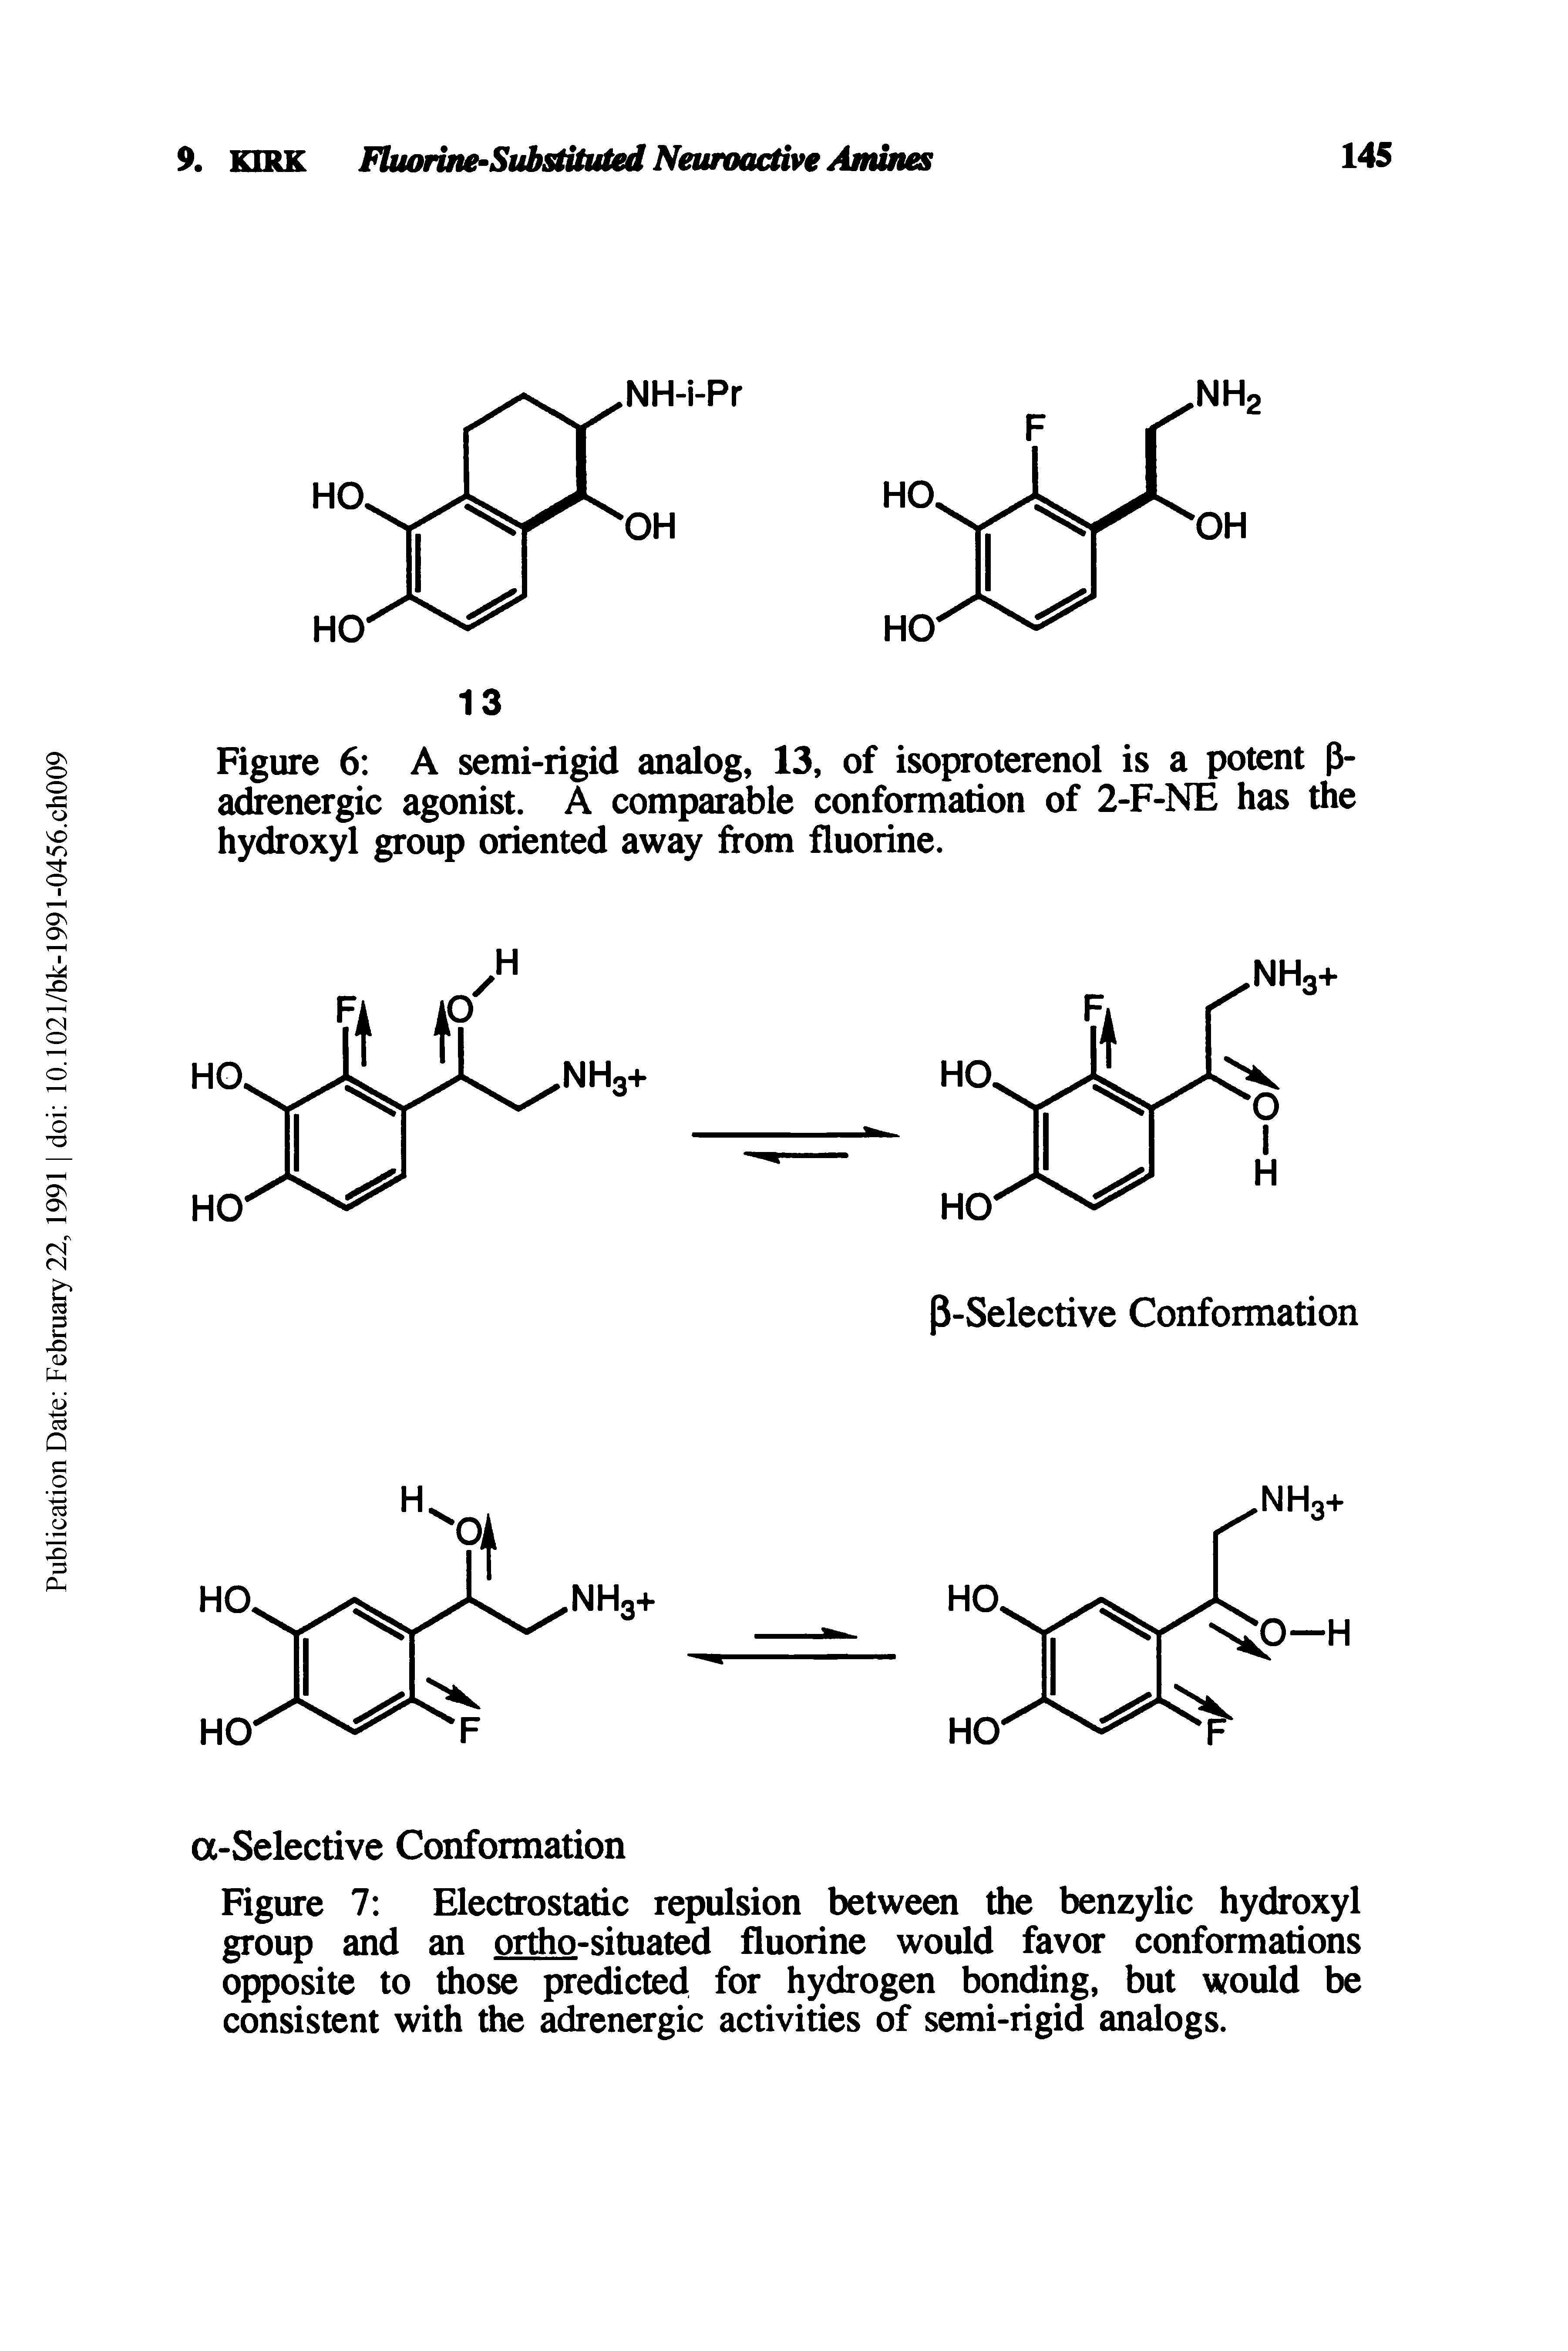 Figure 6 A semi-rigid analog, 13, of isoproterenol is a potent 3-adrenergic agonist. A comparable conformation of 2-F-NE has the hydroxyl group oriented away from fluorine.